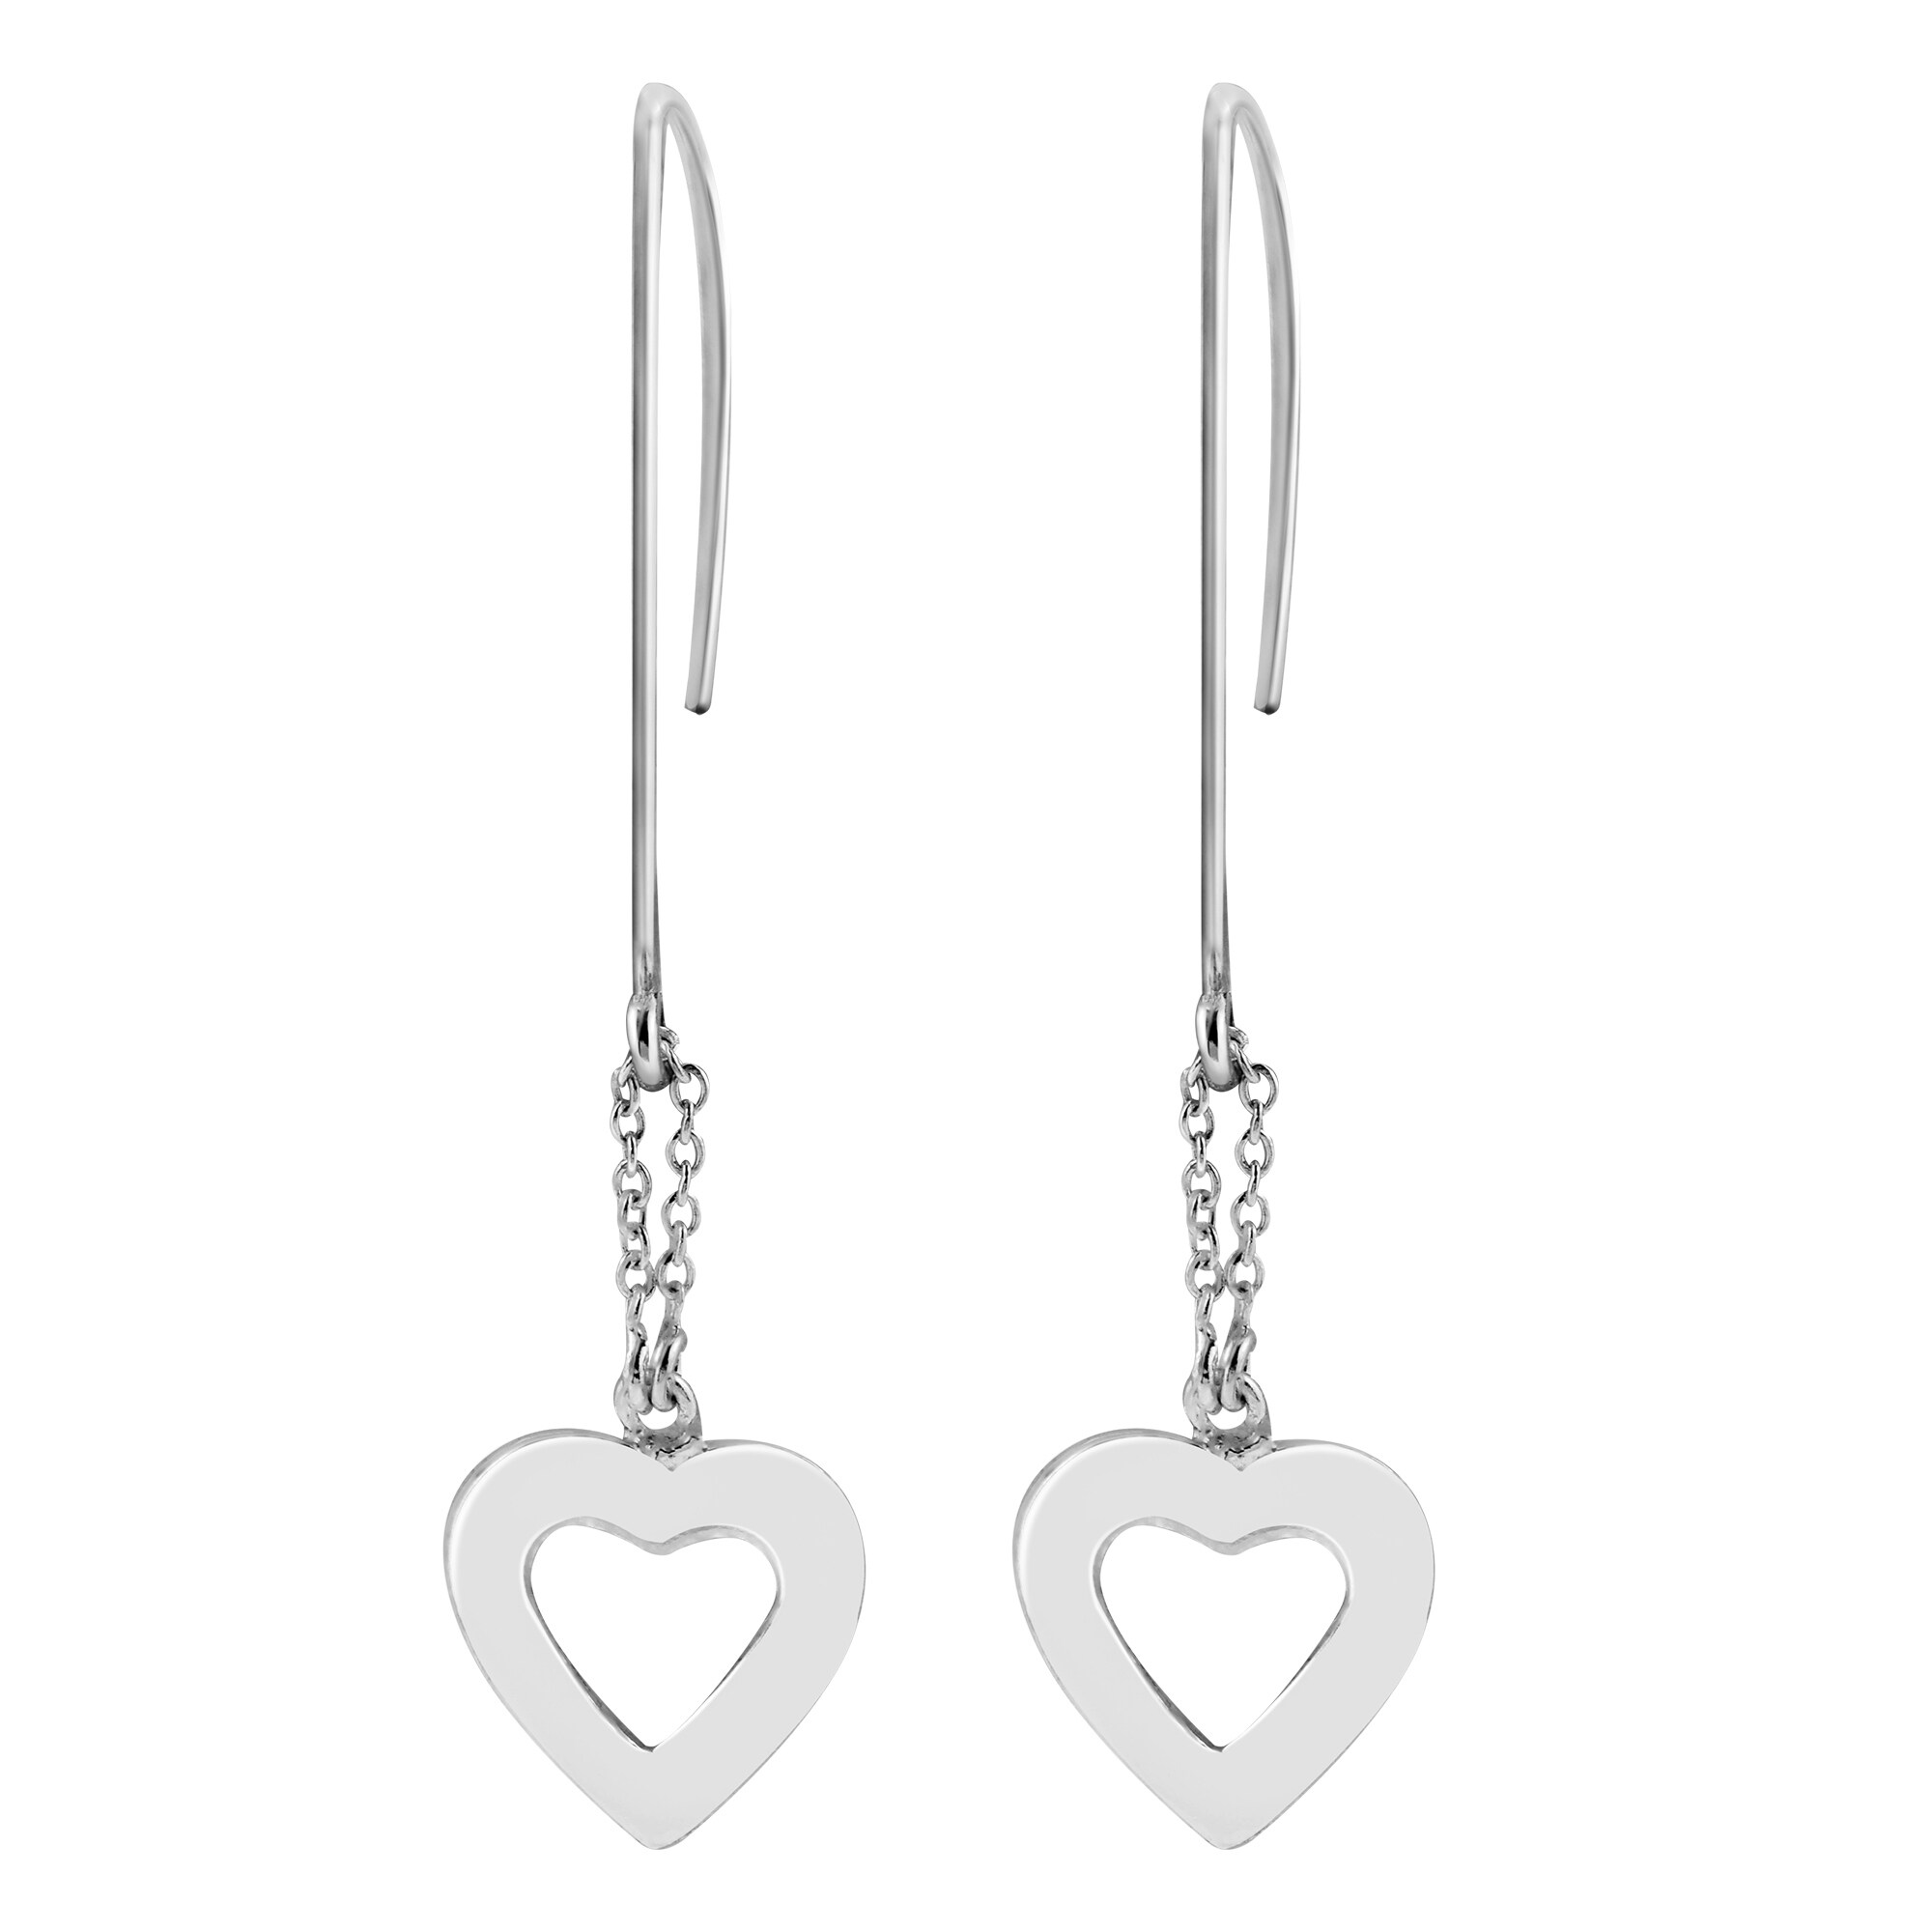 Handmade Stylish Small sterling silver earrings solid 925 Hearts E000708 Empress